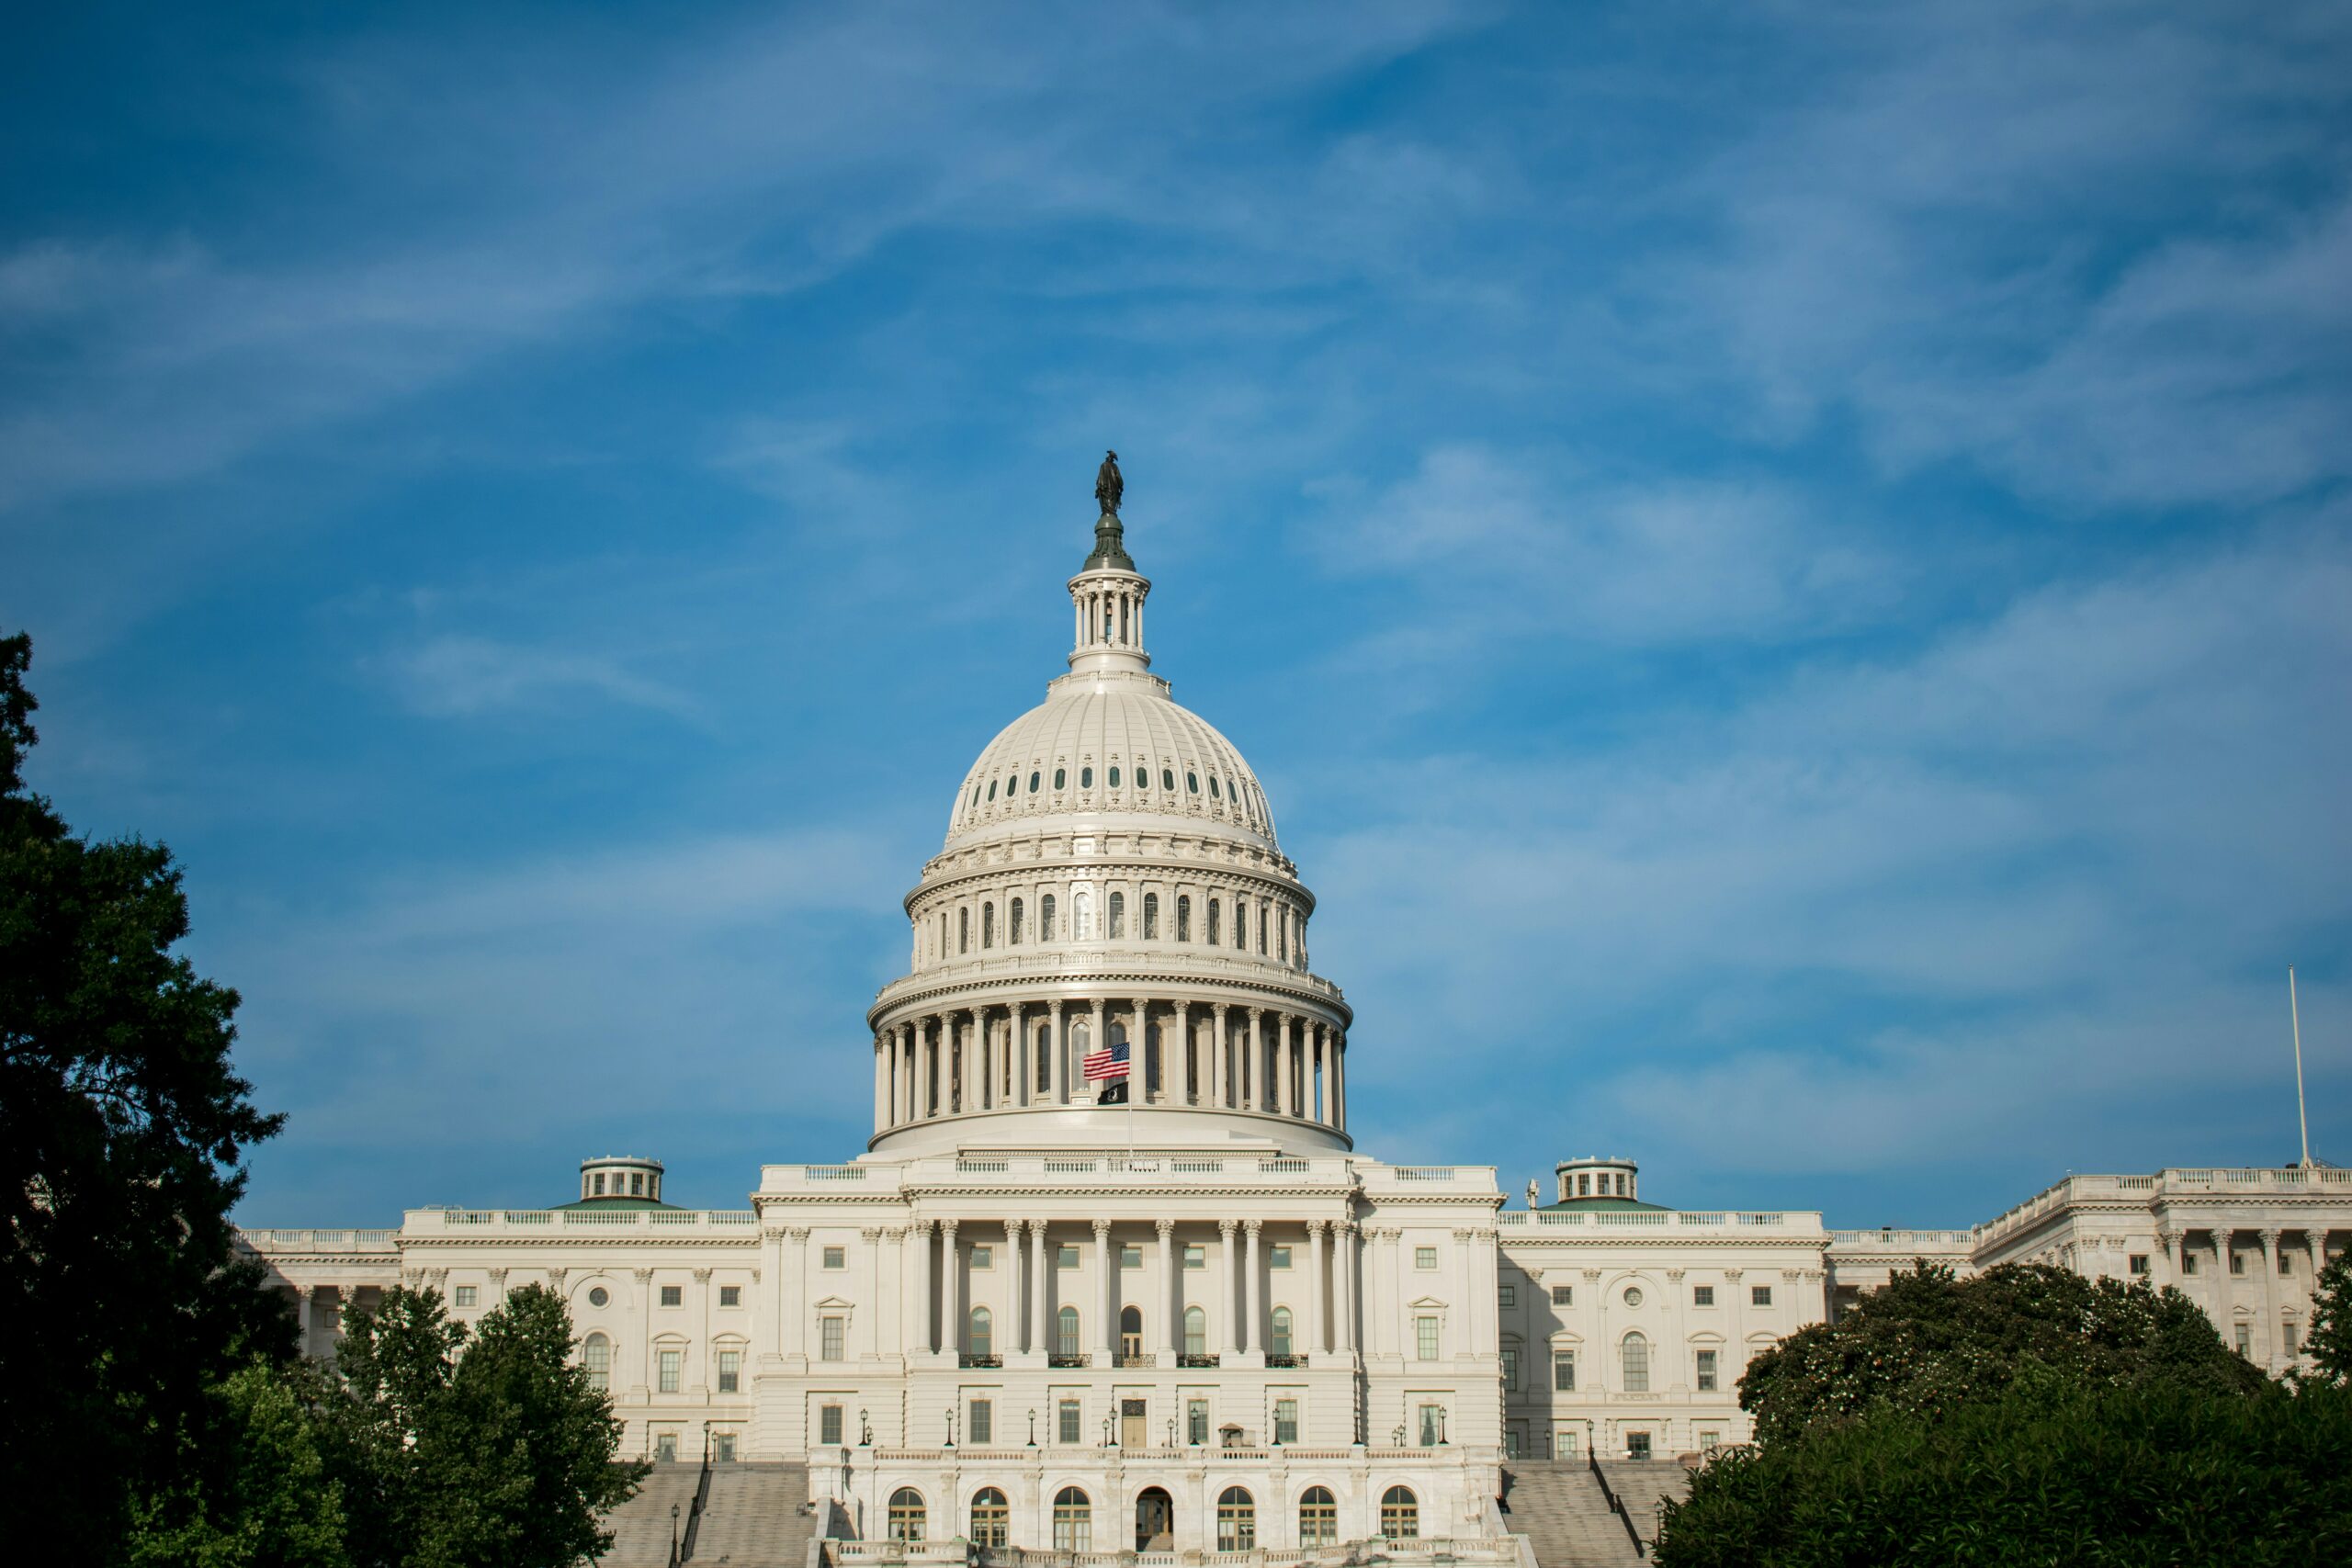 HousingWire: “Congressional lawmakers form bipartisan real estate caucus”